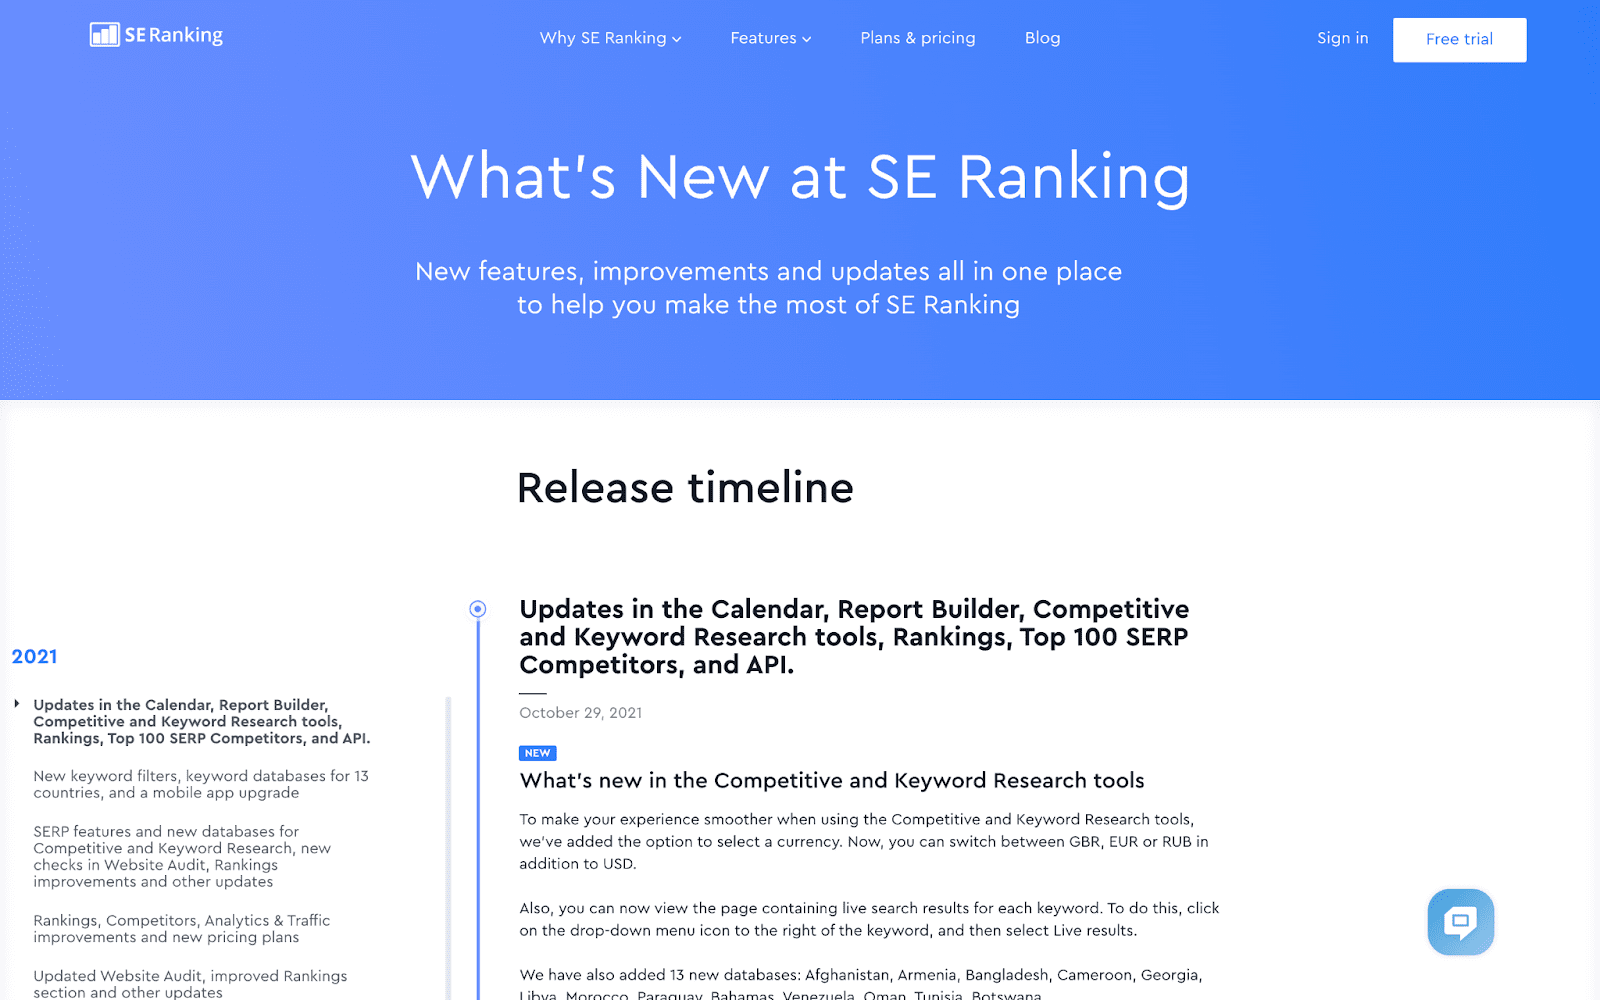 SE Ranking's What's New page